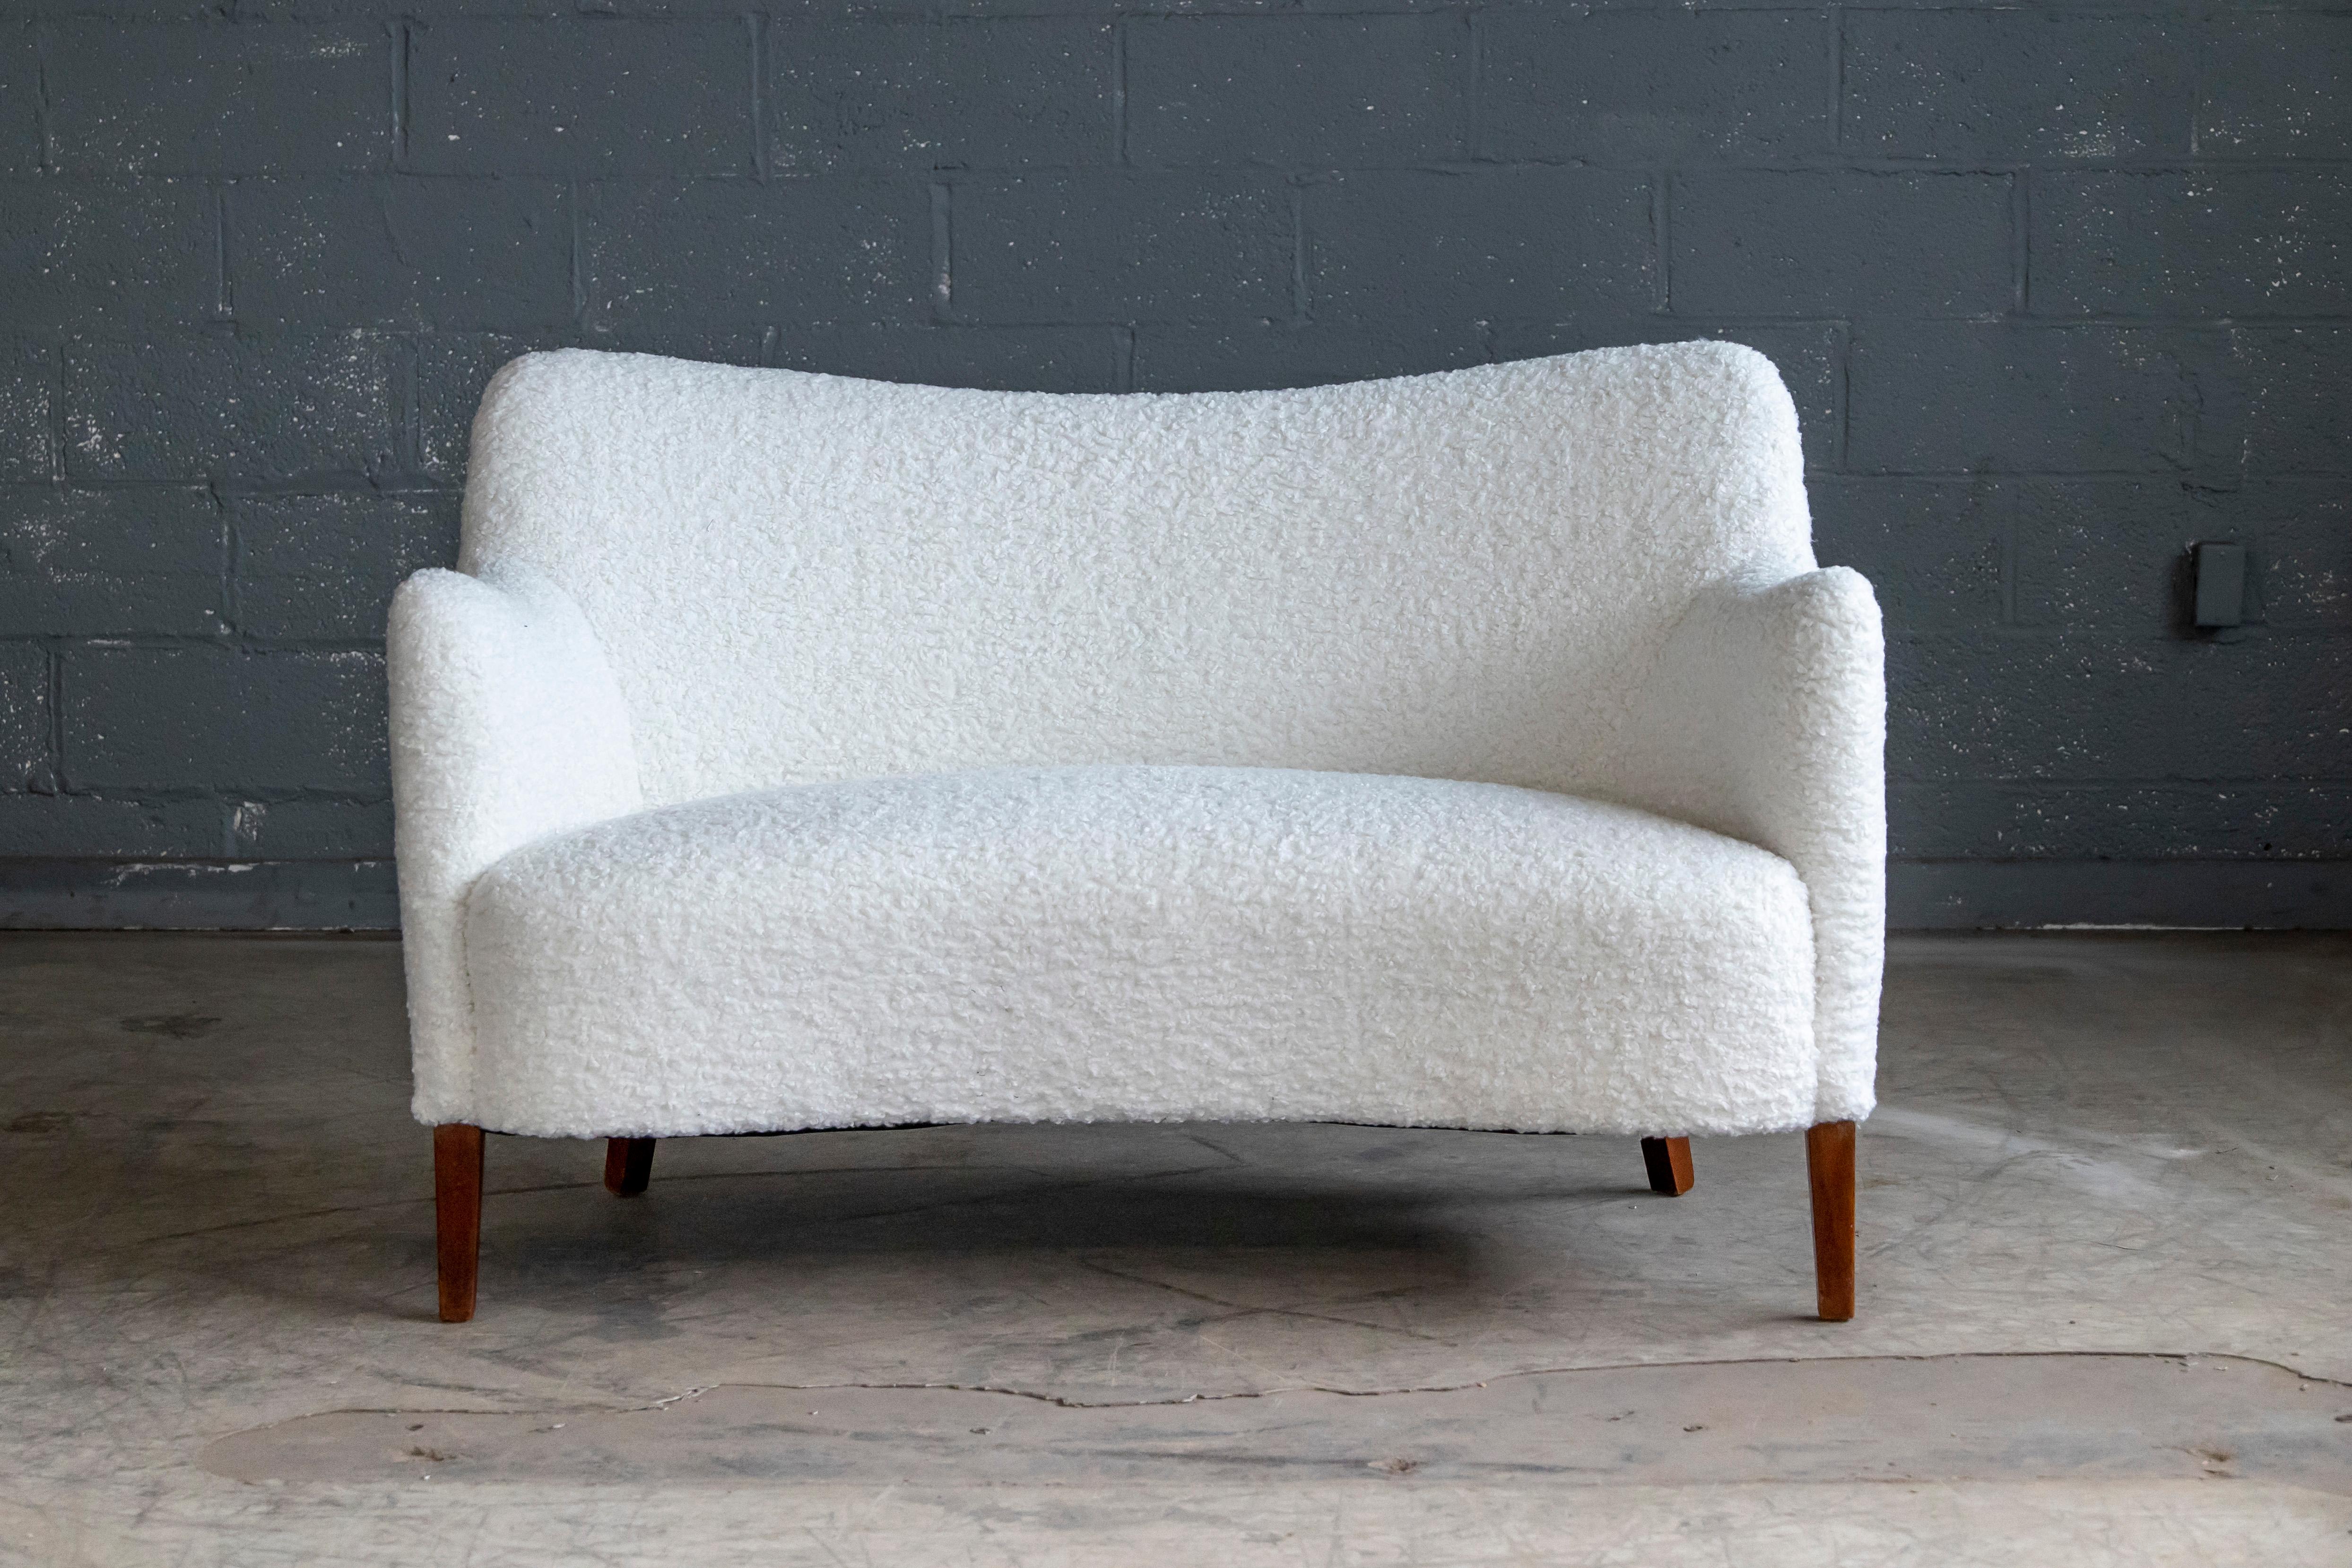 Beautiful and rare Danish settee or loveseat known as the 